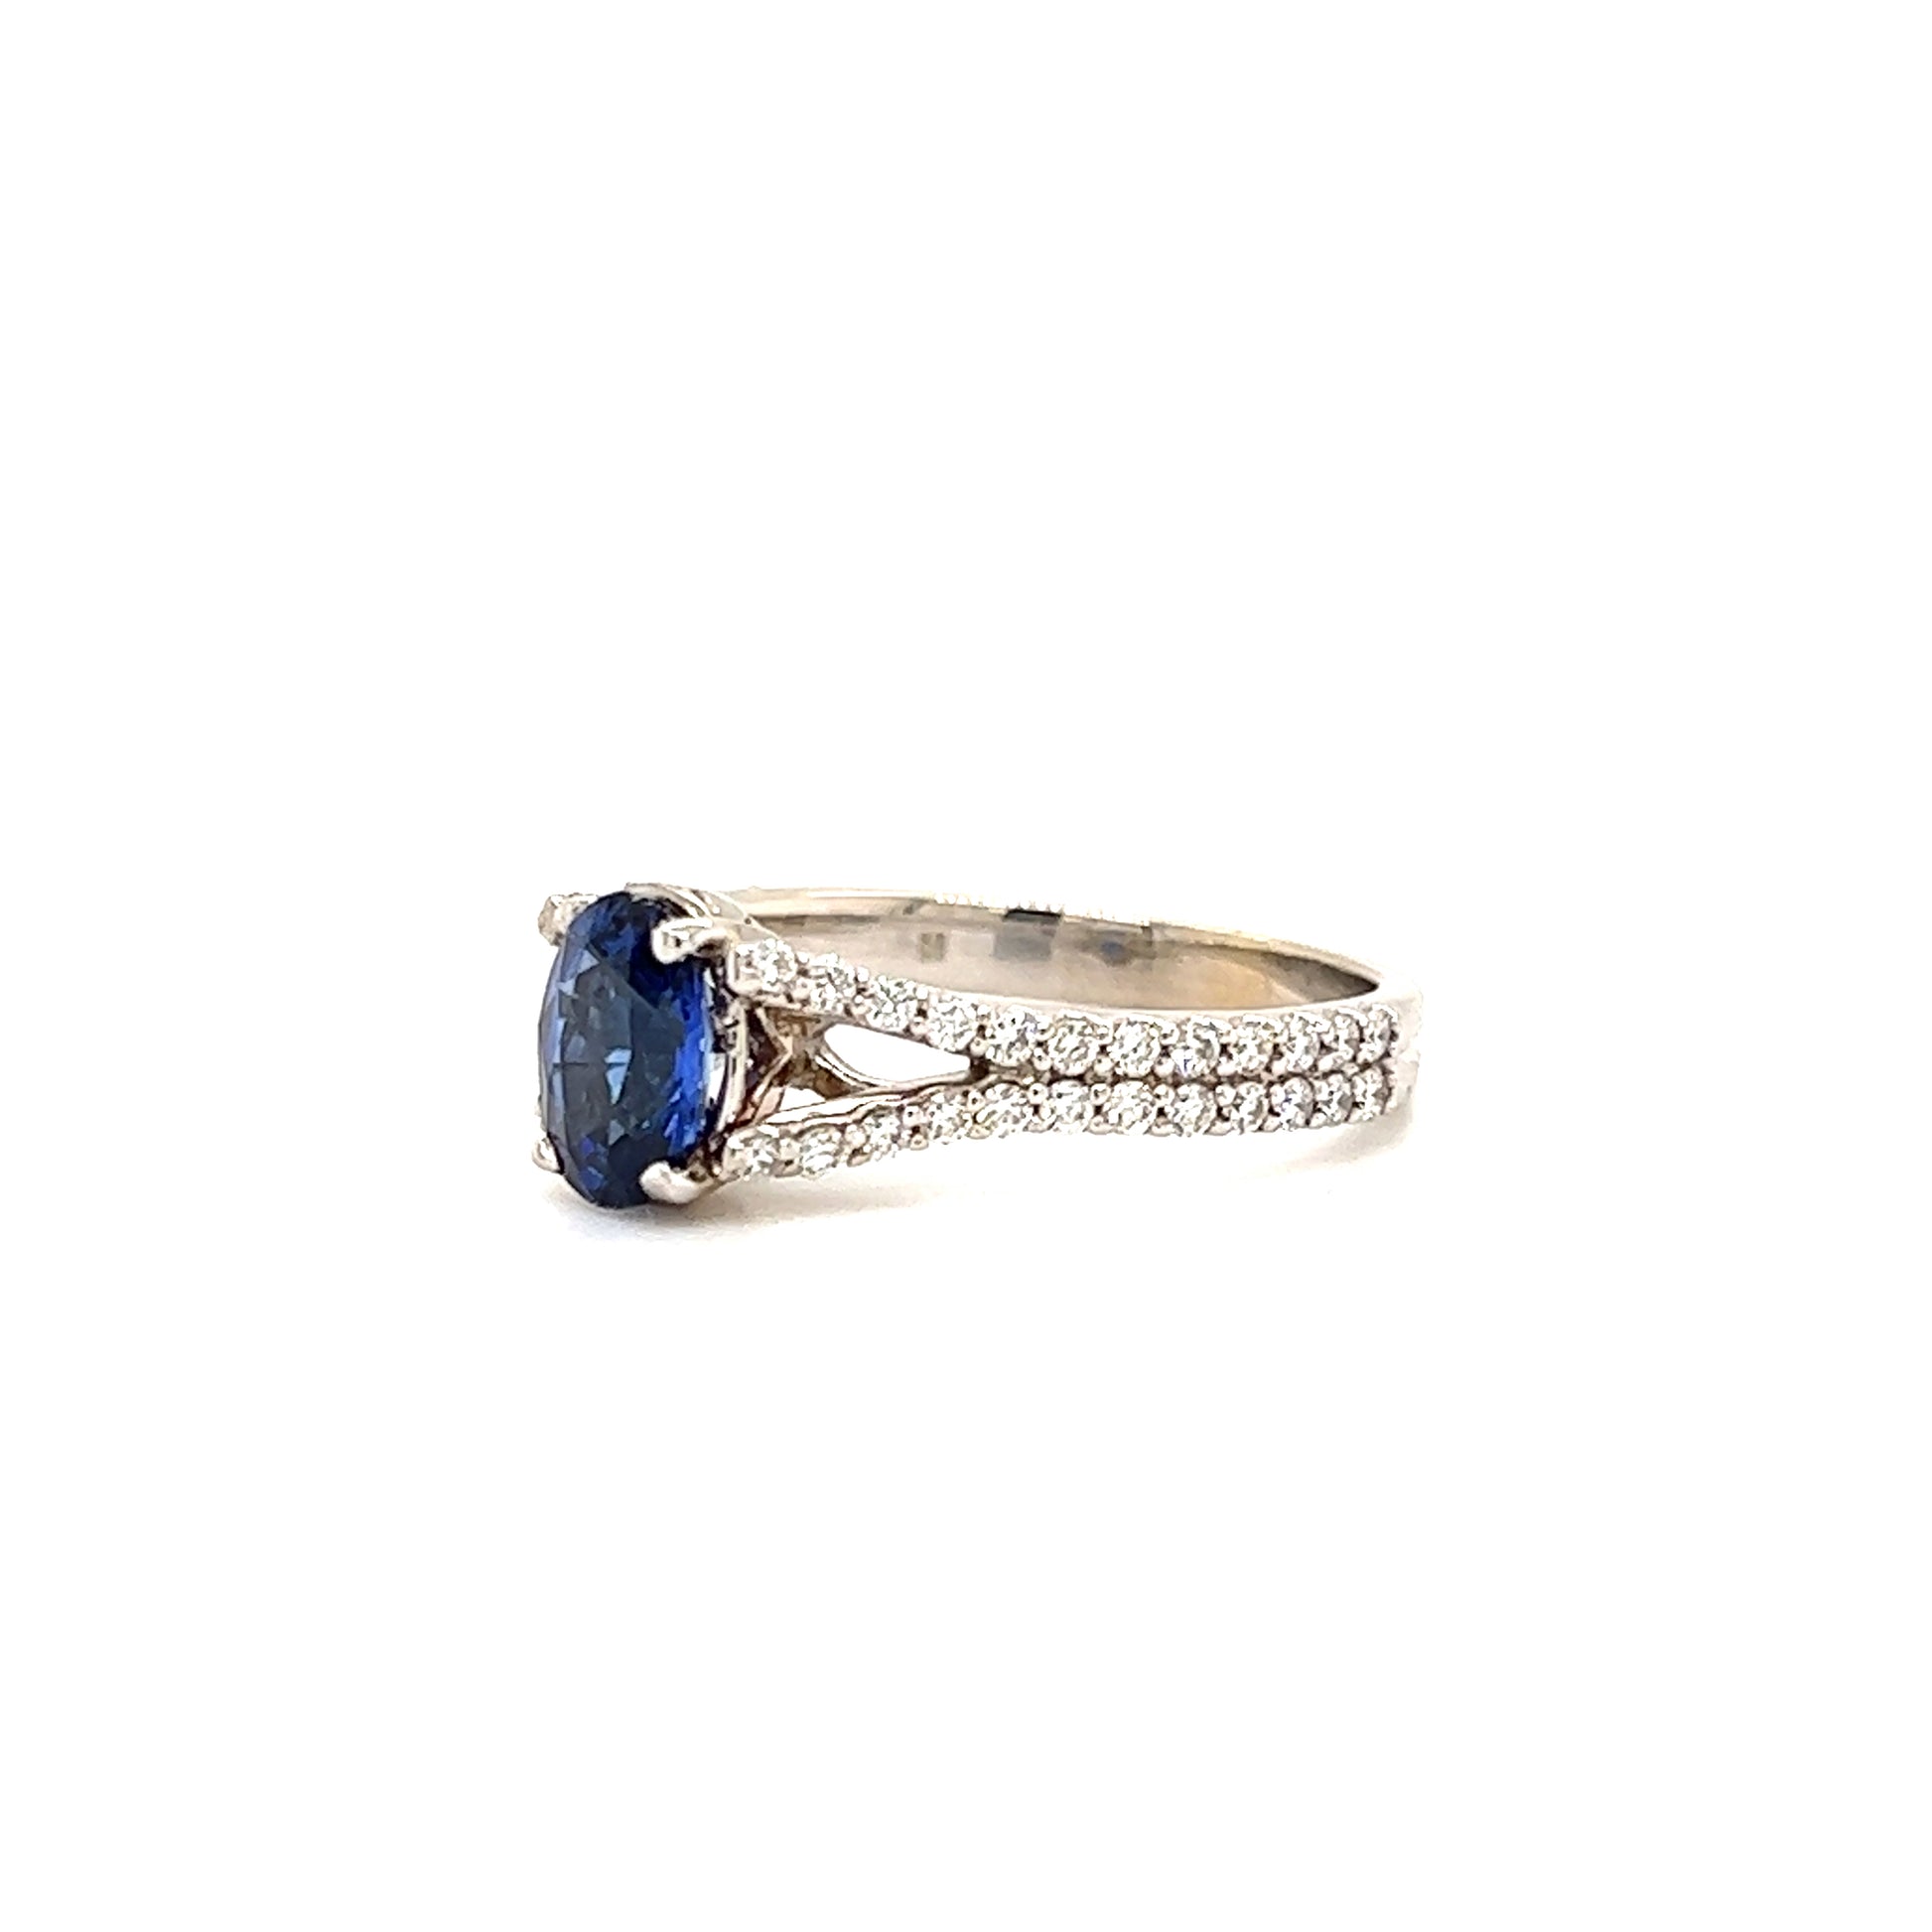 Oval Blue Sapphire Ring with Split Diamond Shank in 14K White Gold Left Profile View